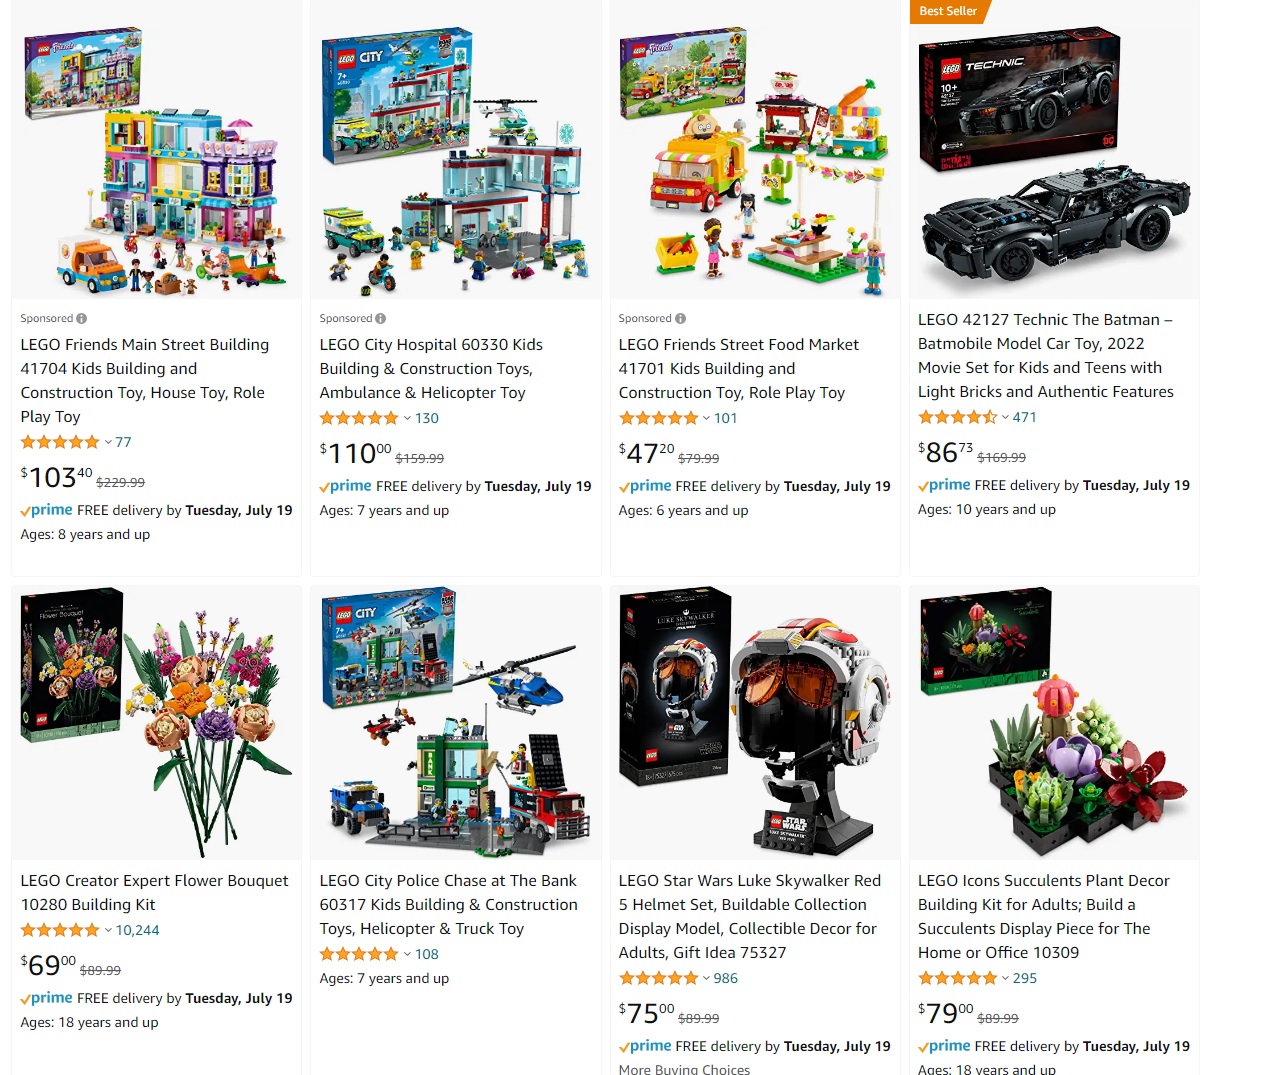 Lego Flower Bouquets Get Rare Markdowns in  Sale - TheStreet